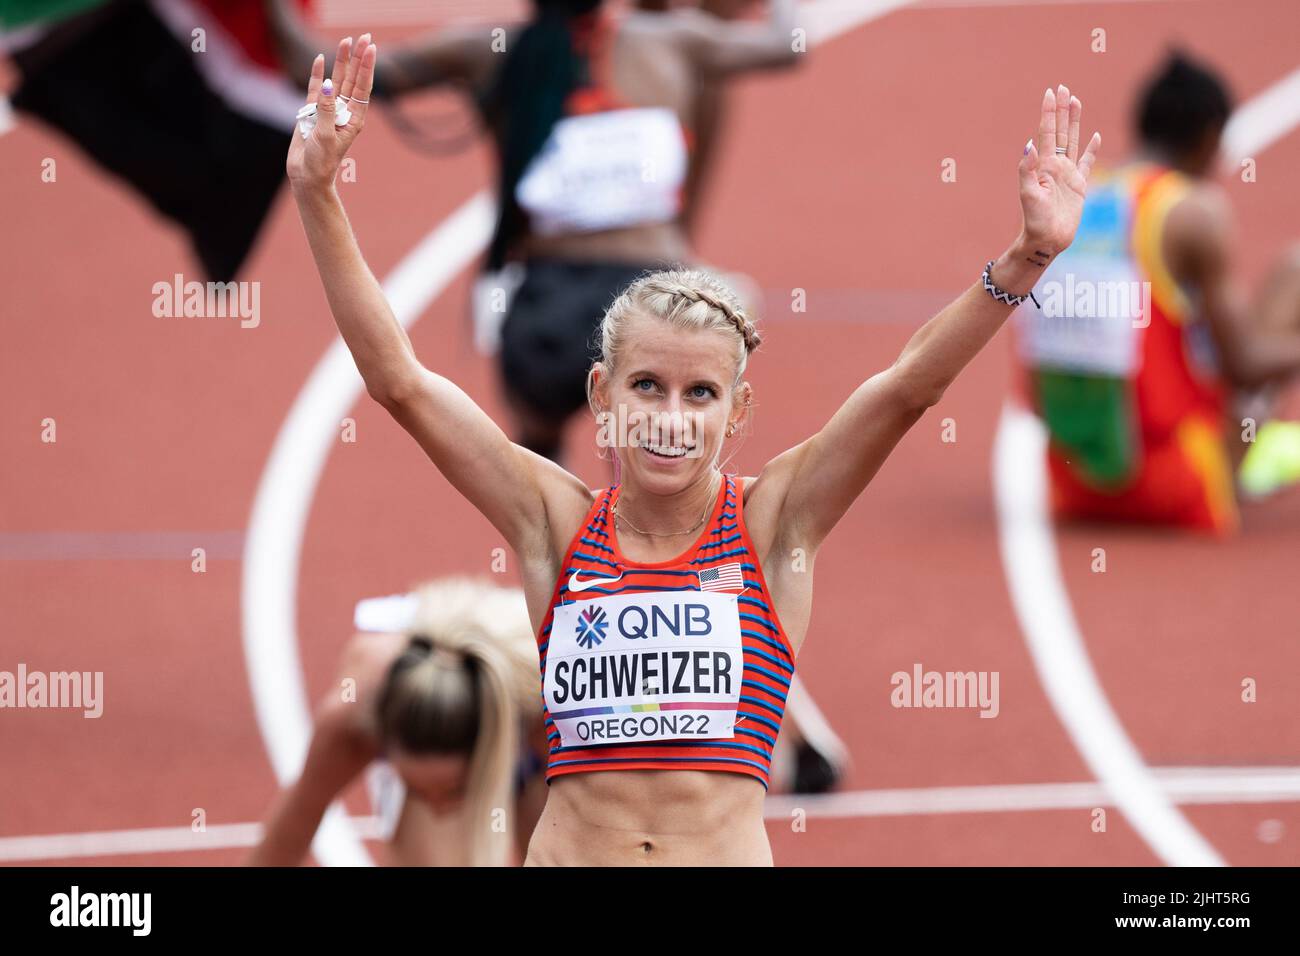 Karissa Schweizer (USA) waves to the crowd after finishing the 10,000 meter final during the morning session on day 2 of the World Athletics Champions Stock Photo